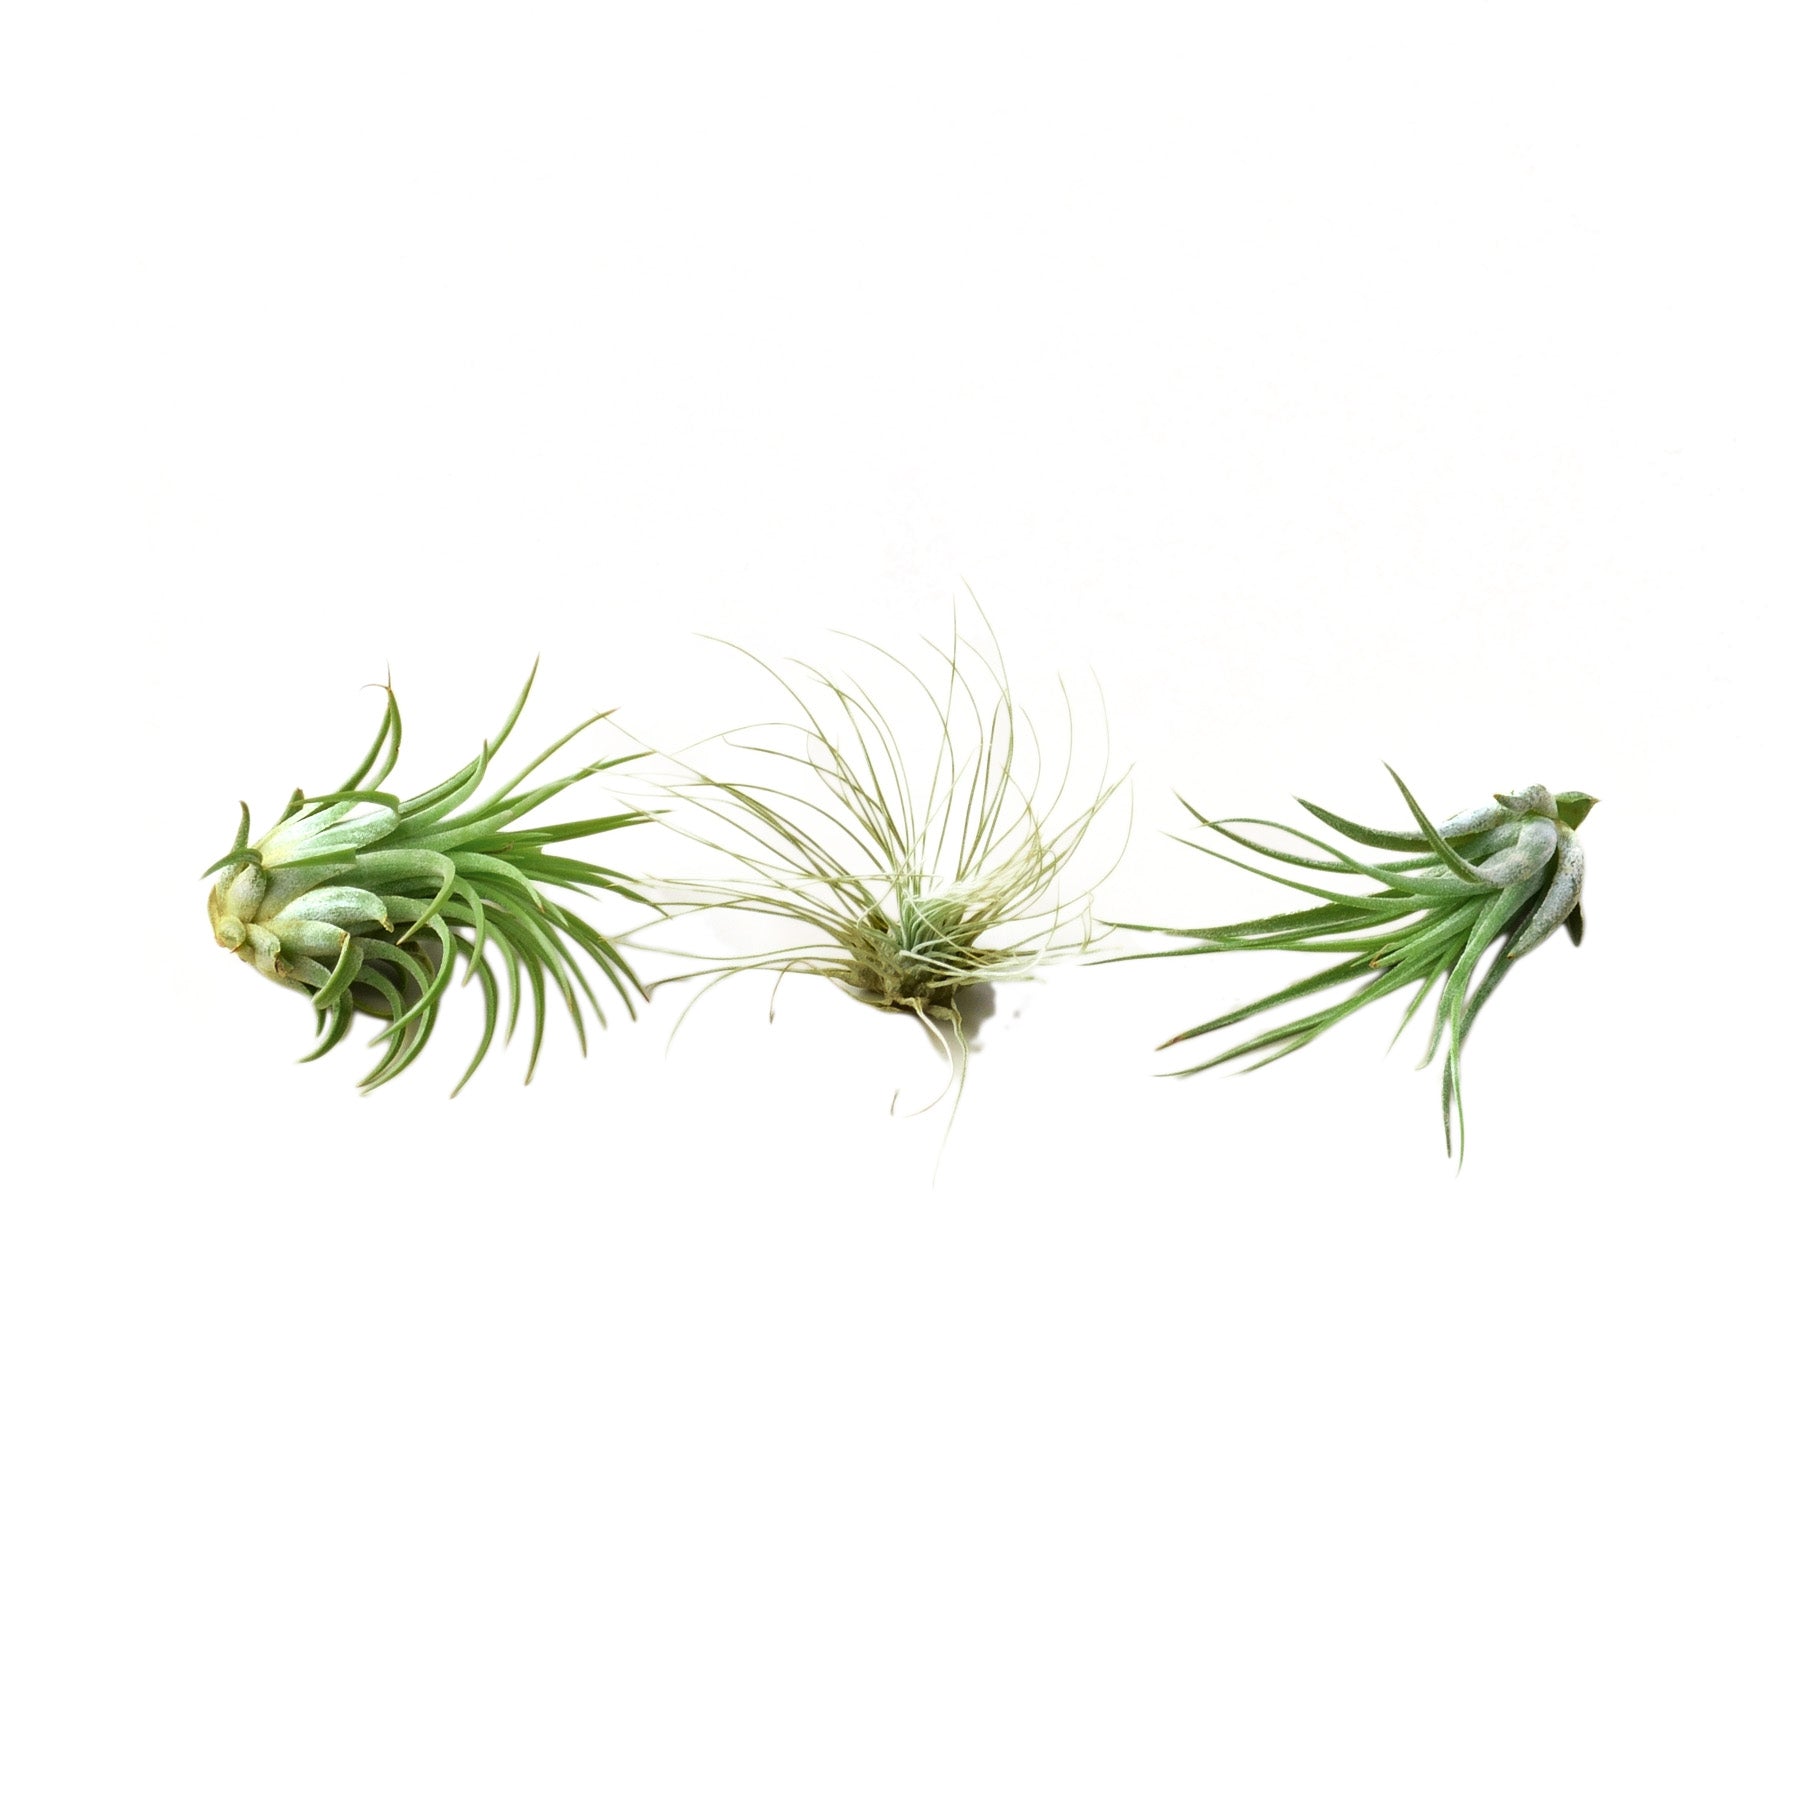 Three air plants on a white background at the best plant nursery near me.